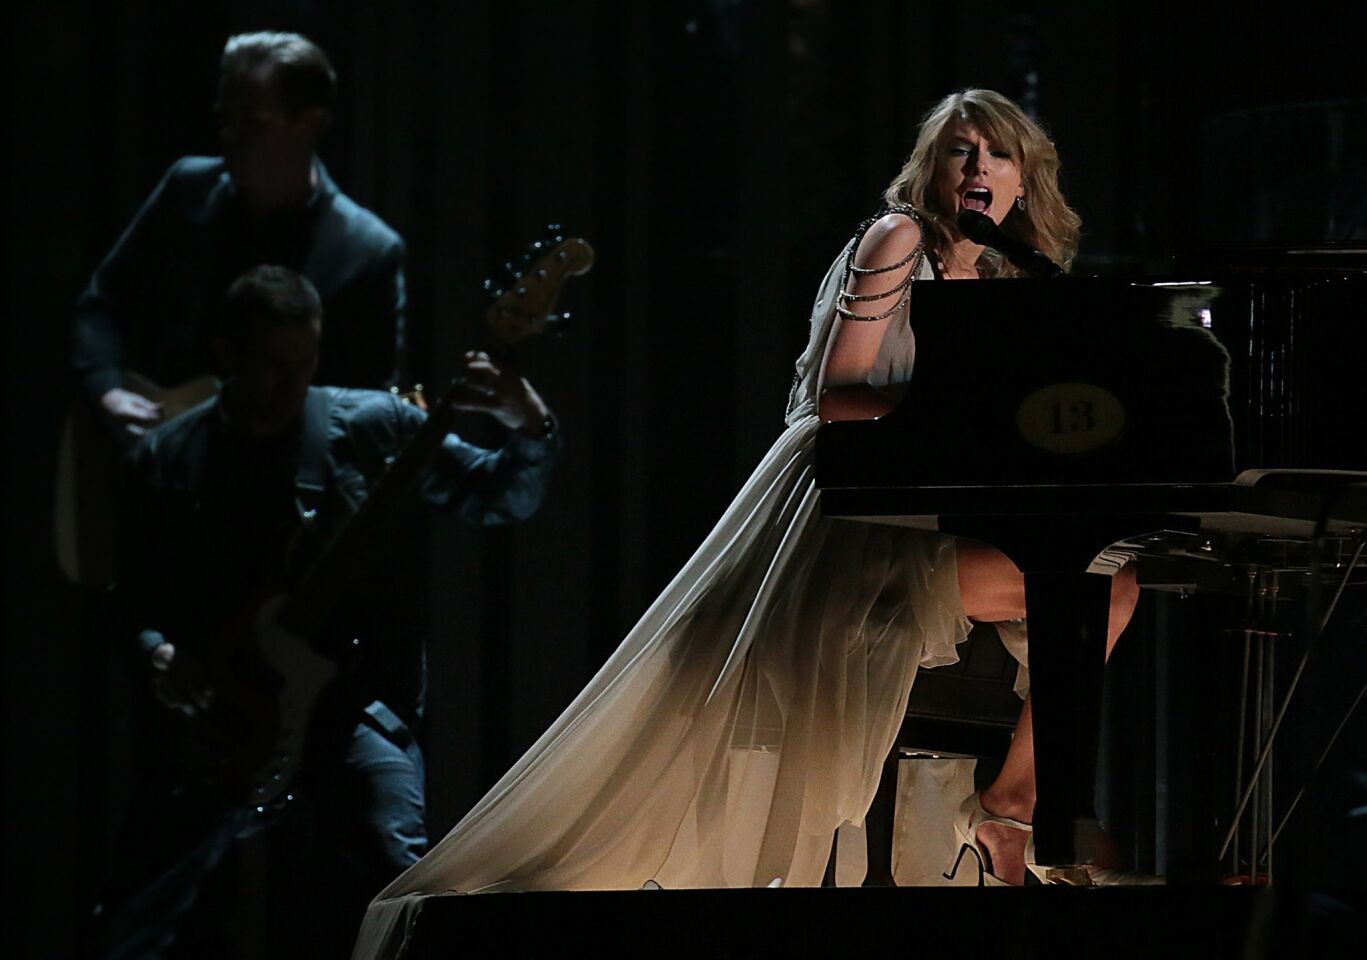 Taylor Swift delivers her song "All Too Well" while playing the piano at the Grammy Awards in January 2014.